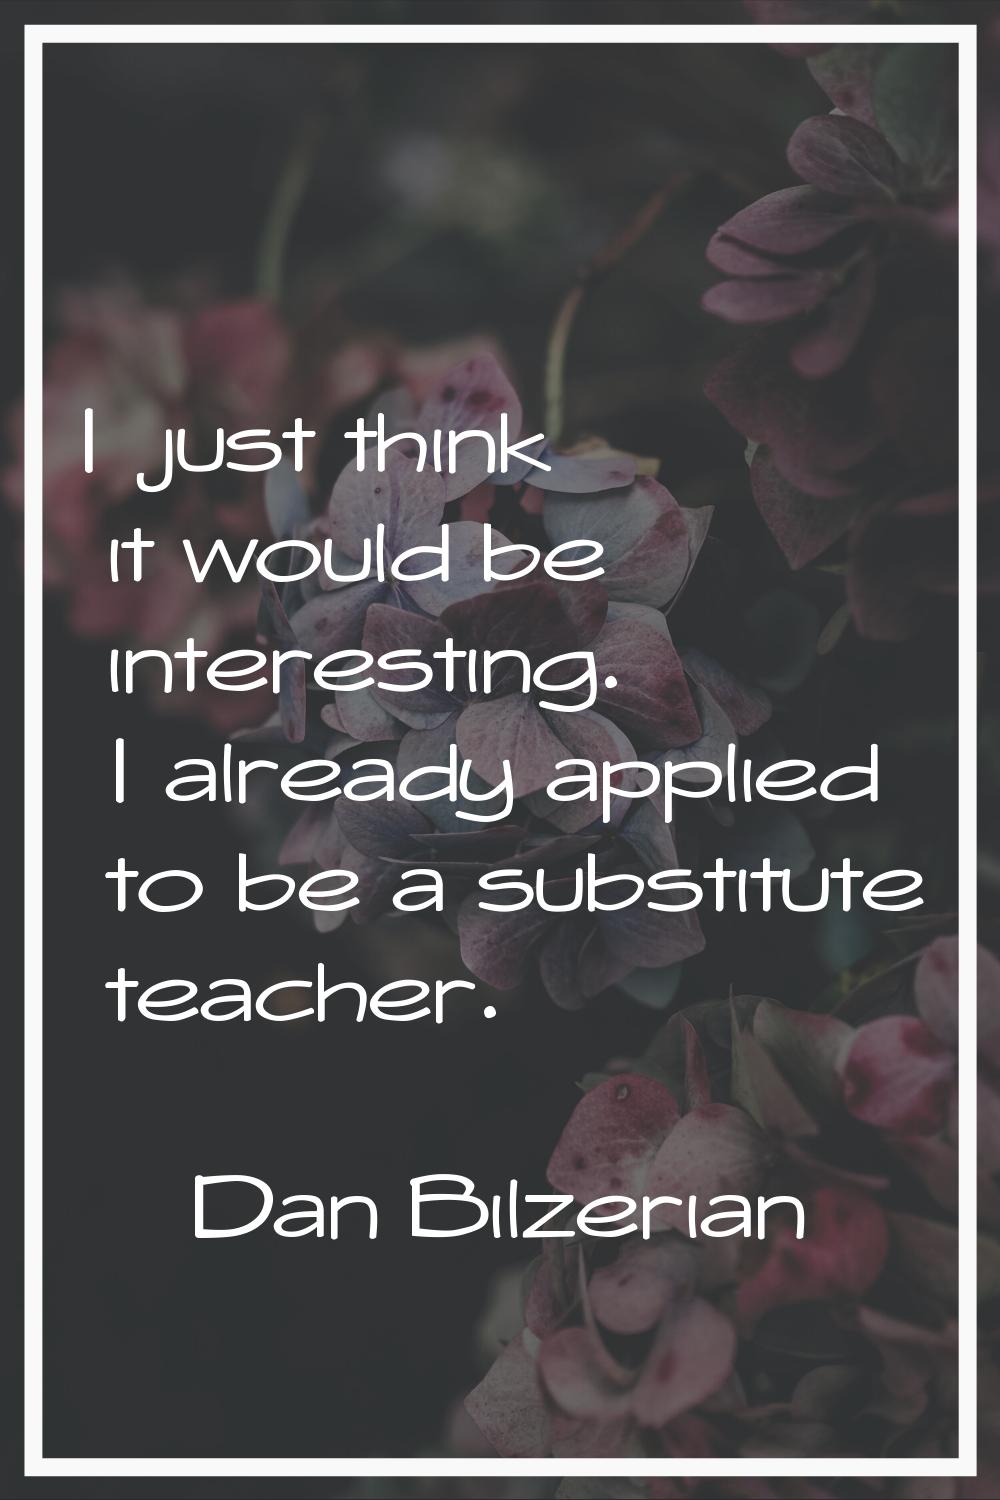 I just think it would be interesting. I already applied to be a substitute teacher.